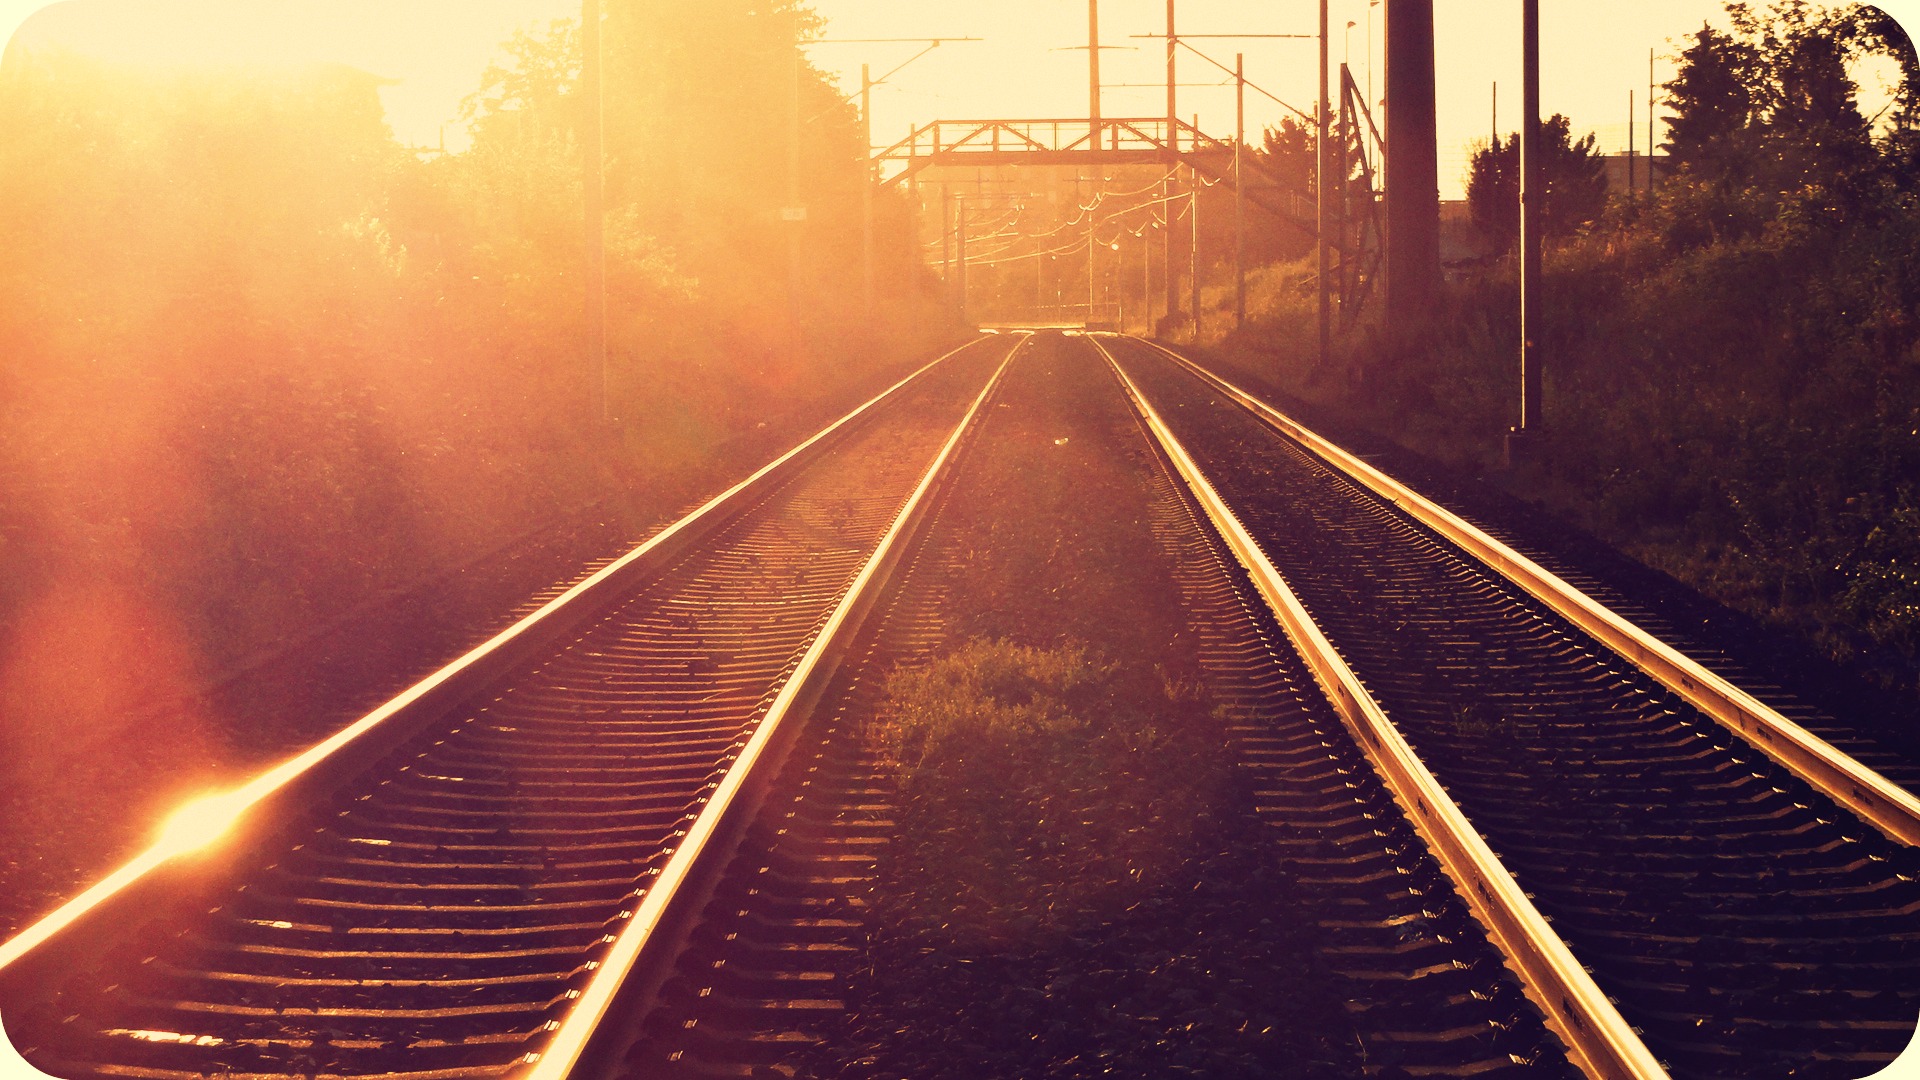 A train track is shown with the sun shining on it. - Sunshine